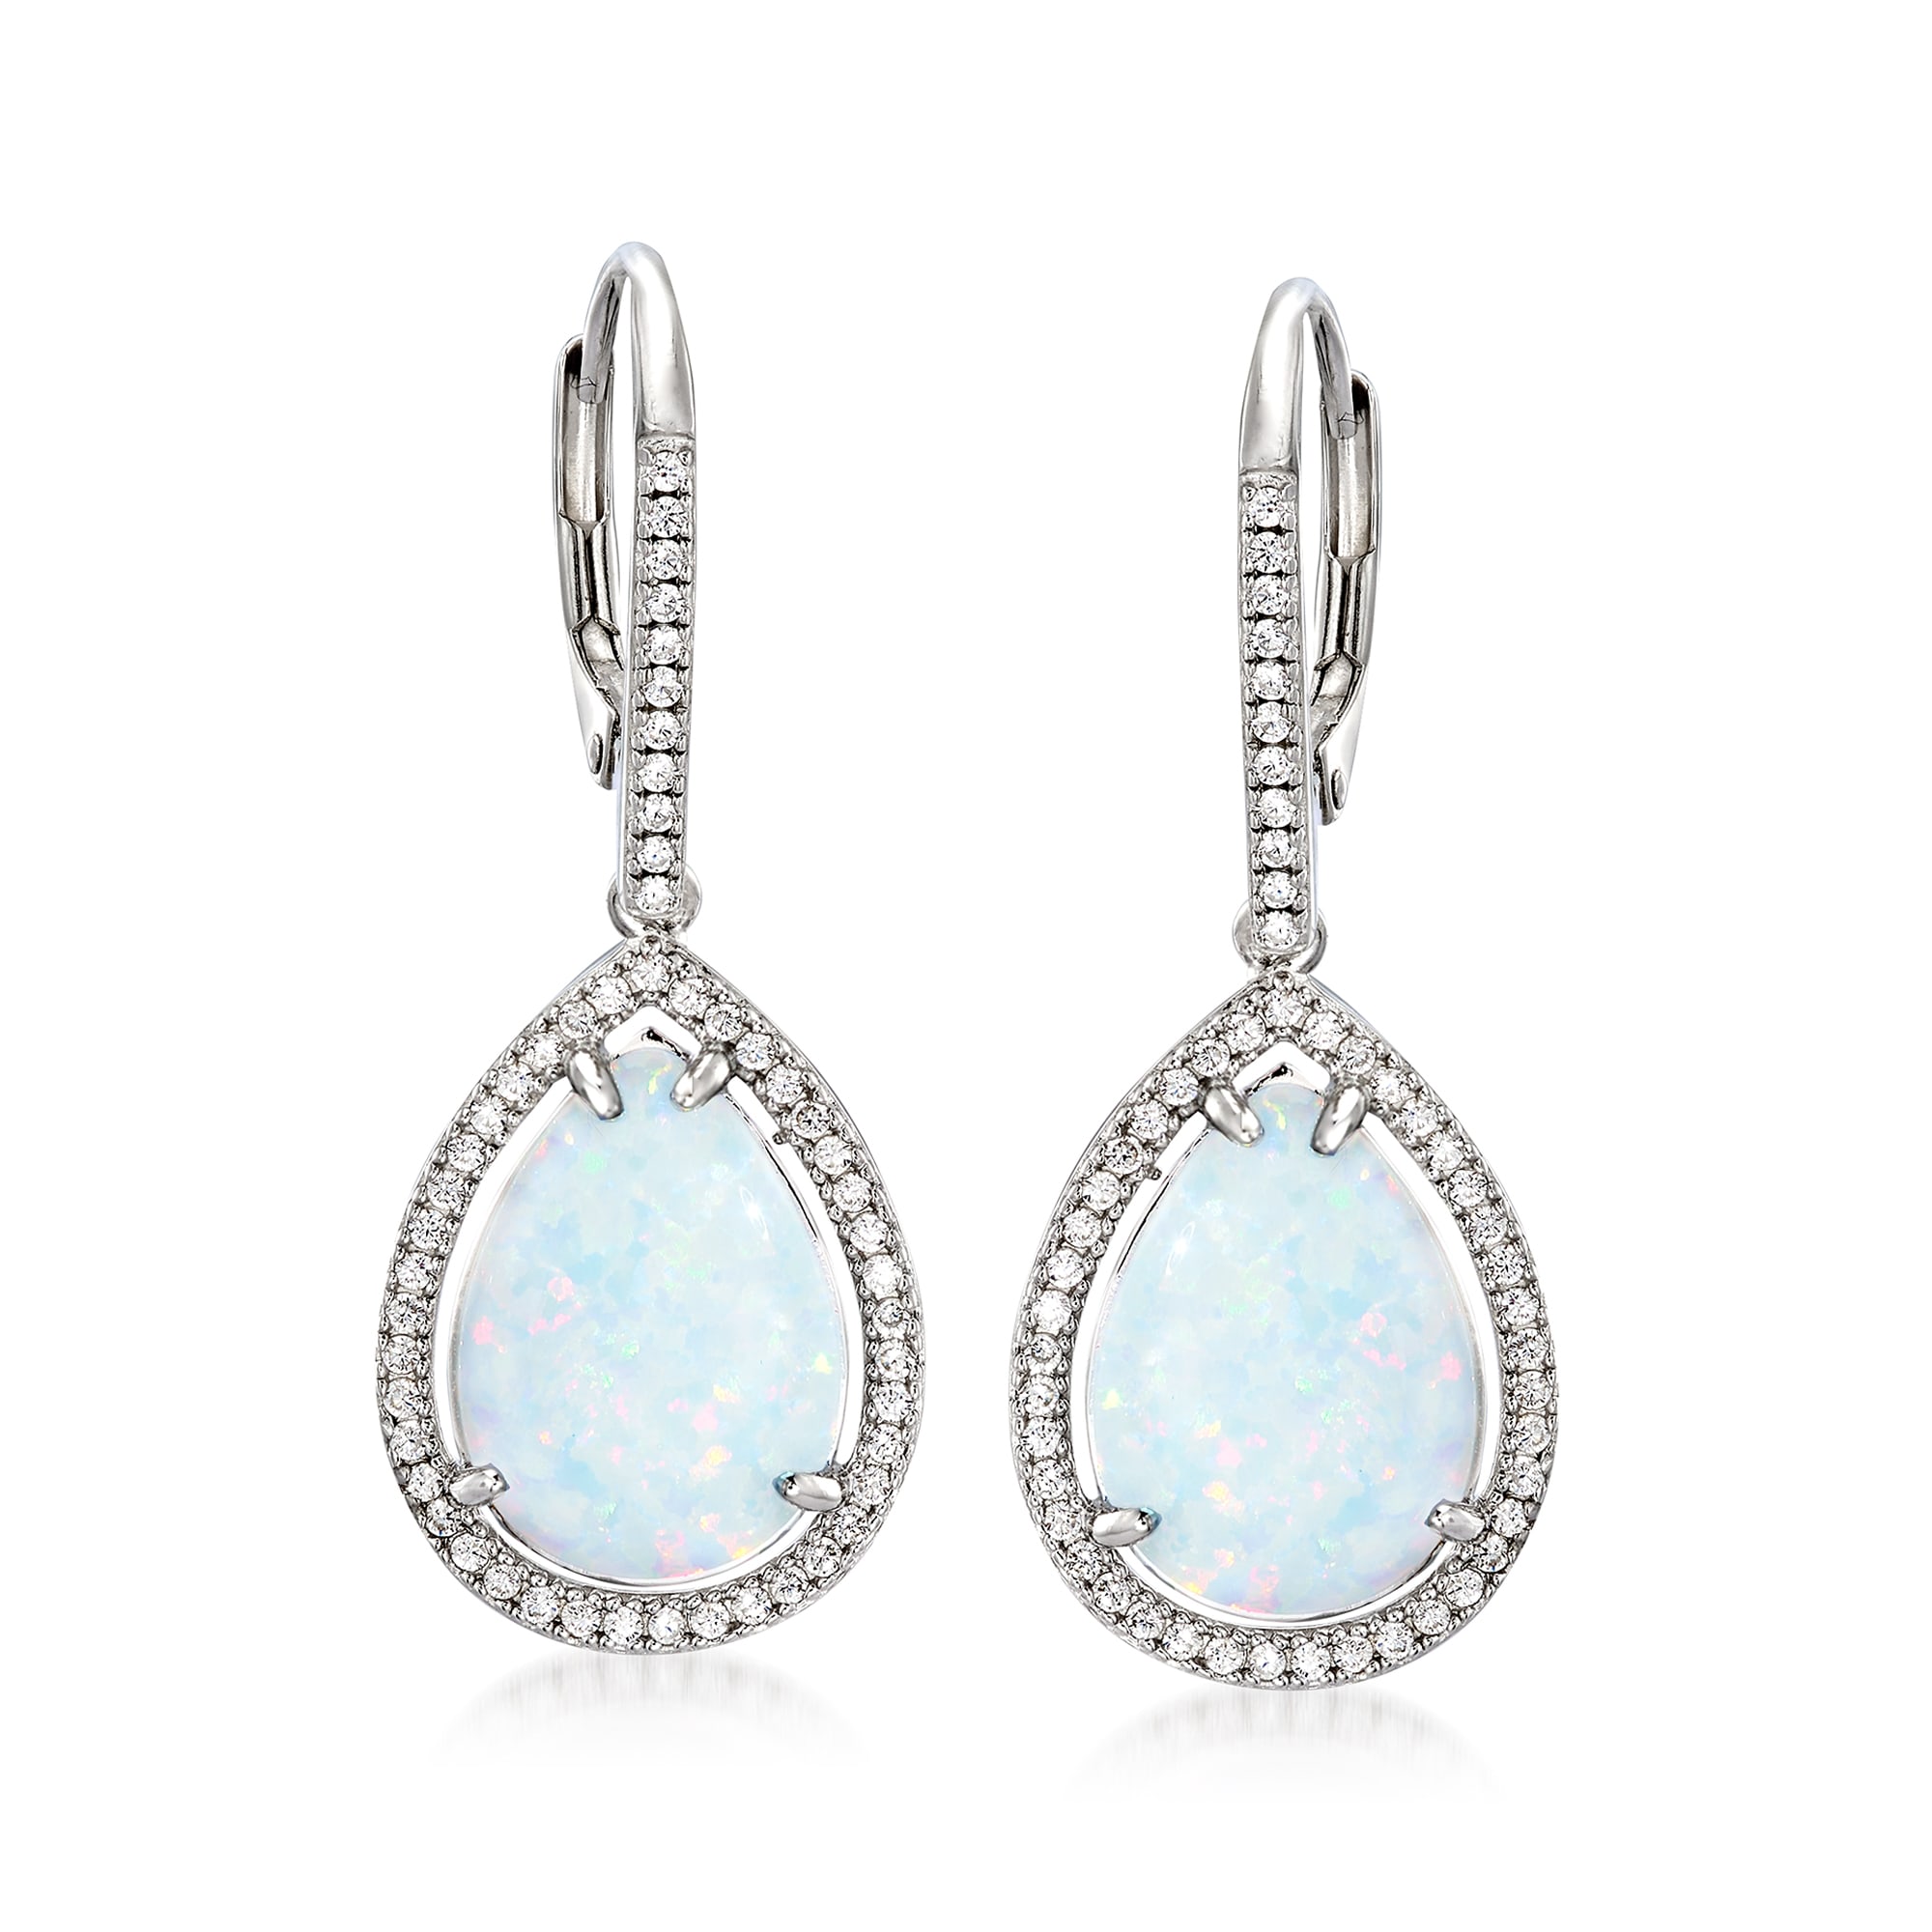 Charles Garnier Simulated Opal and .90 ct. t.w. CZ Drop Earrings in ...